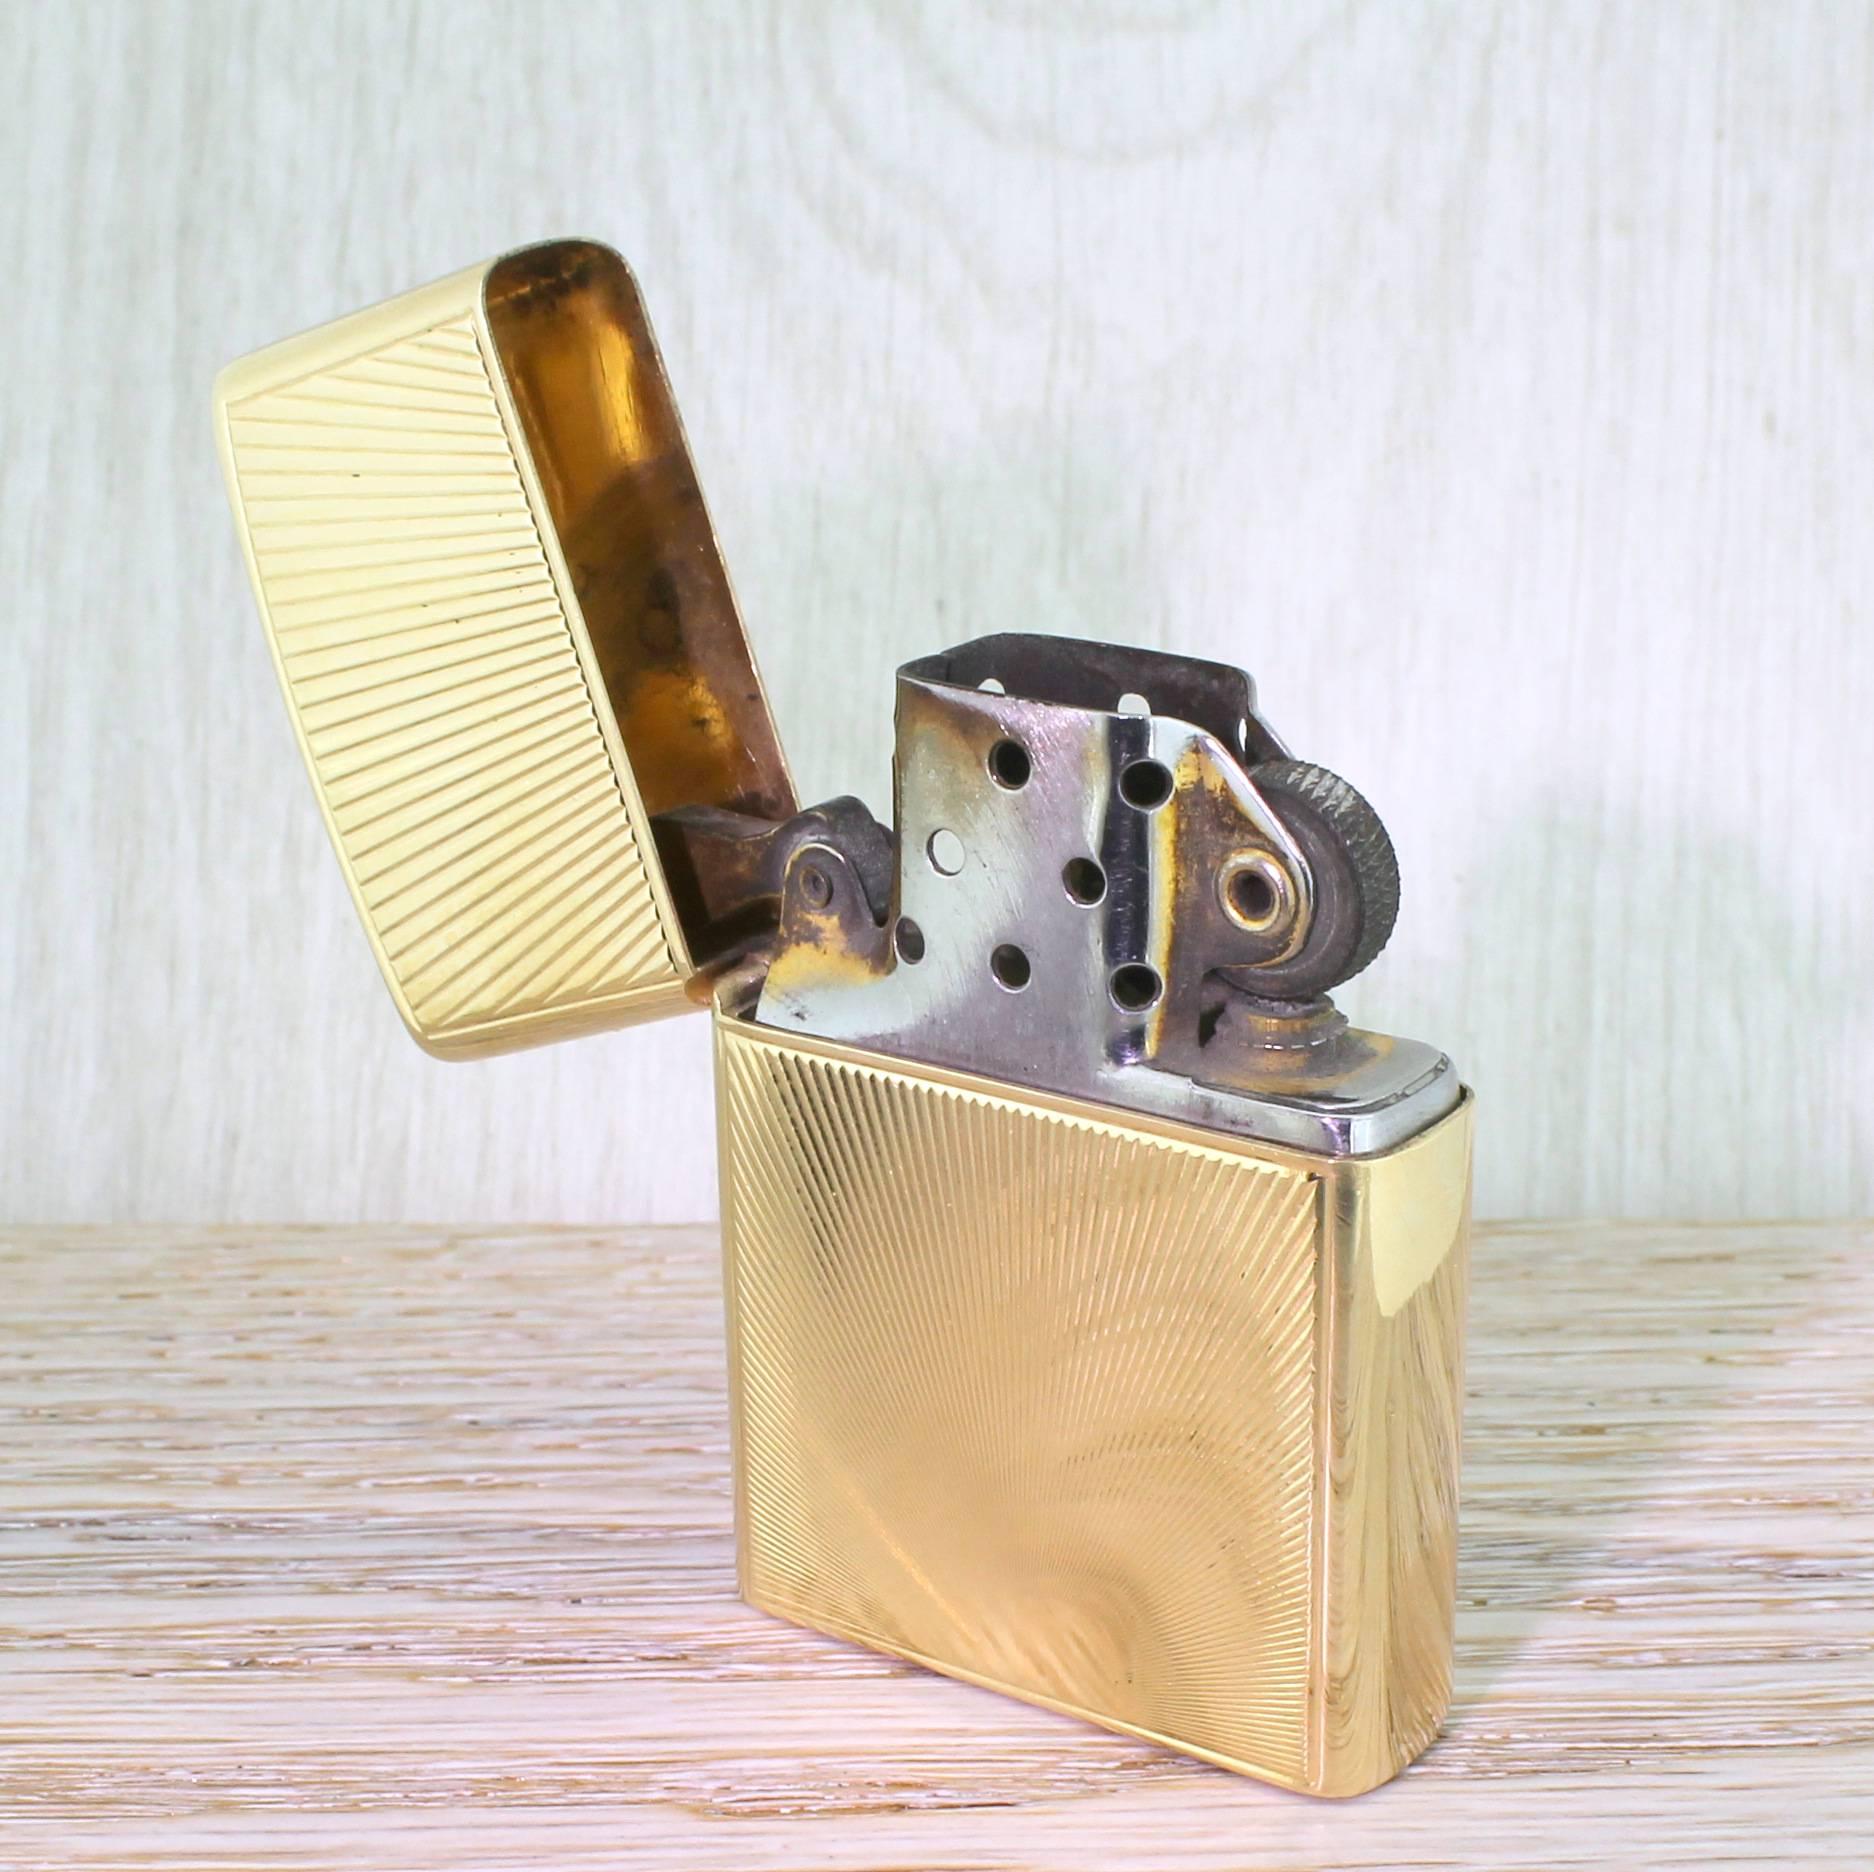 Incredibly cool and very, very rare. The Cartier Zippo lighter case is in solid 14k yellow gold with incised rays emanating from the bottom centre of the case.

Weighs, without the internal Zippo mechanism, 38.5 grams.